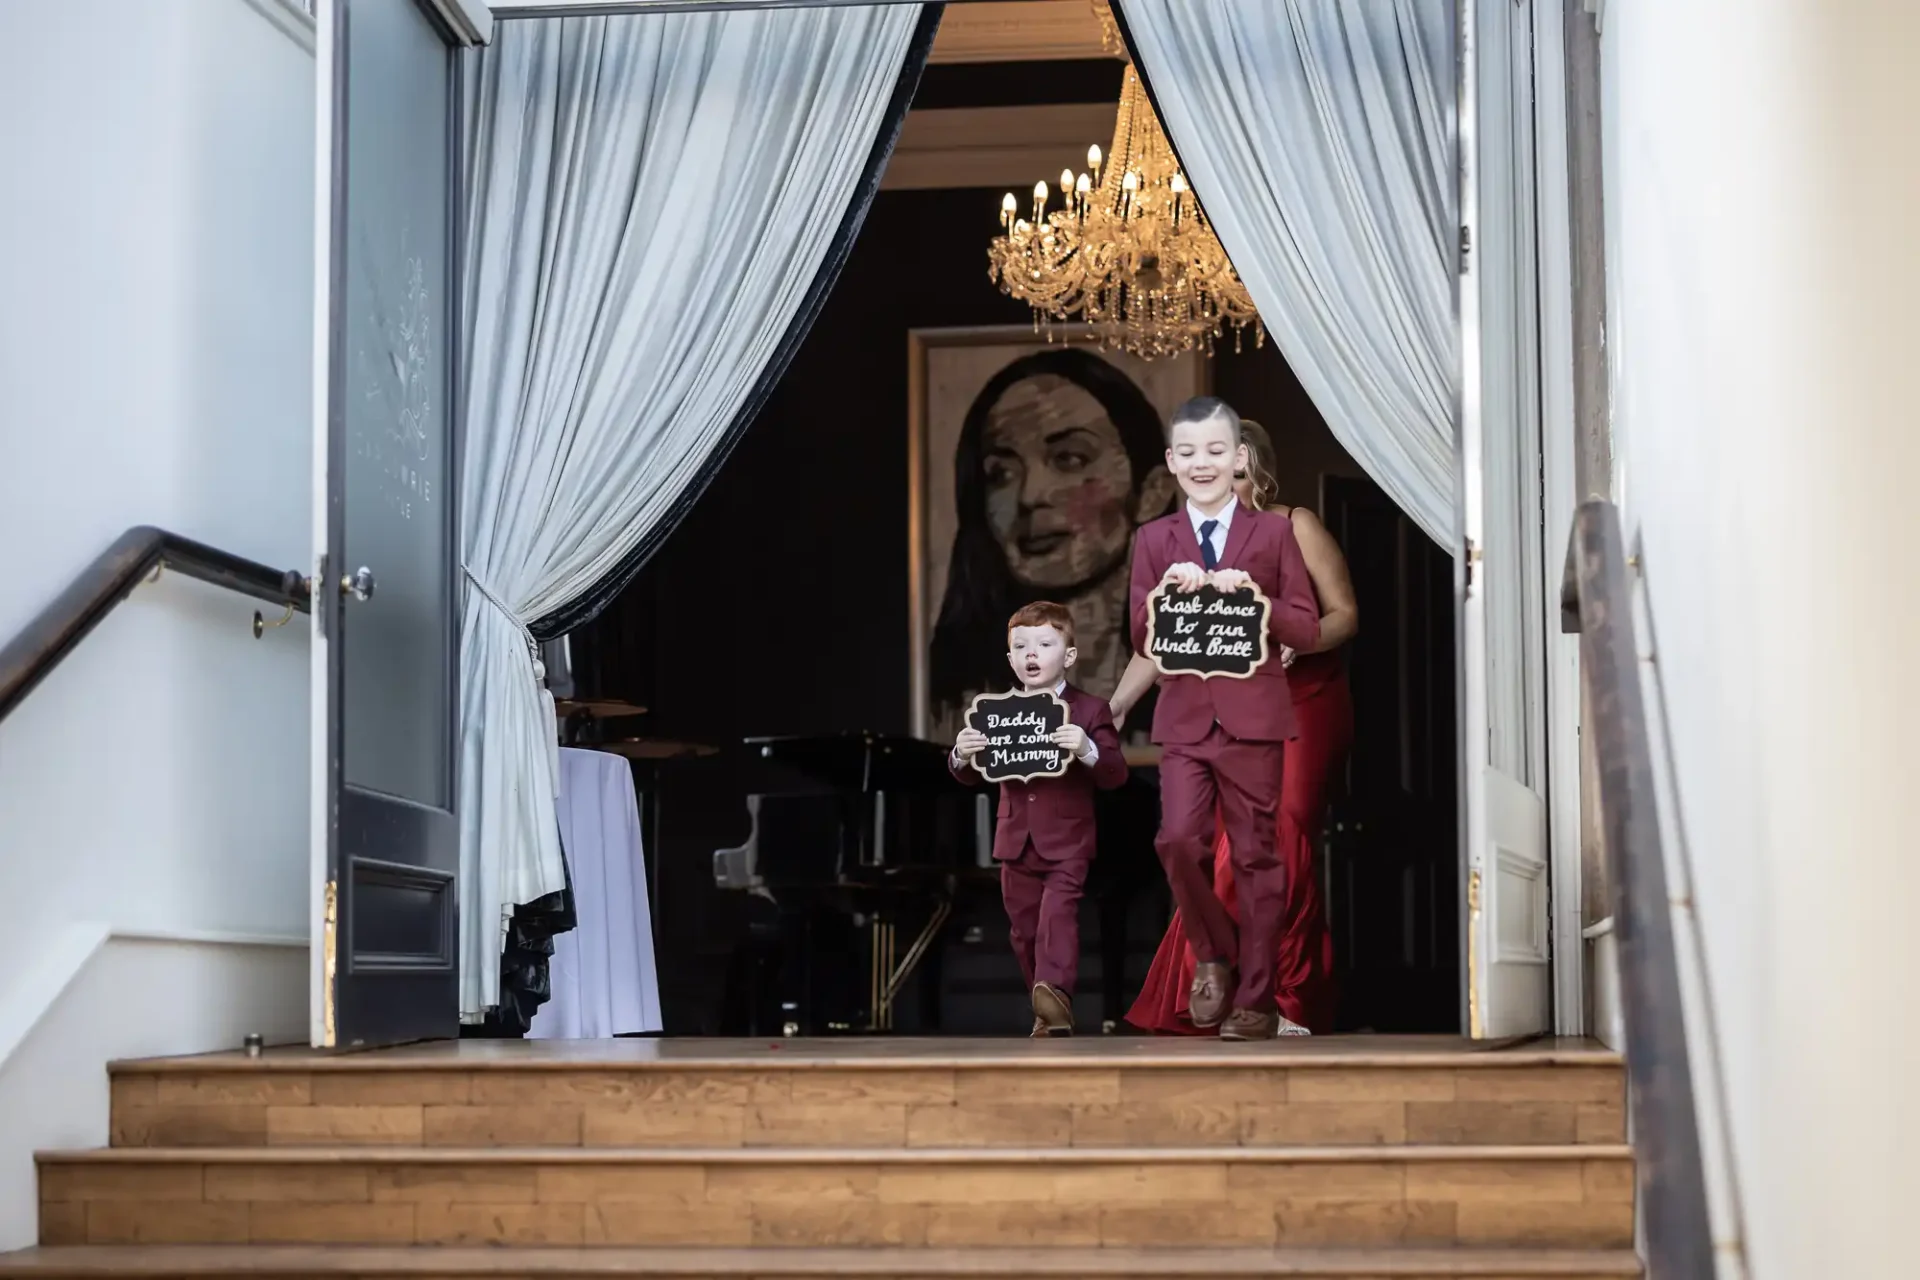 Two children in red suits walk down the stairs, each holding a sign that says "uncle chris, here comes your bride!.